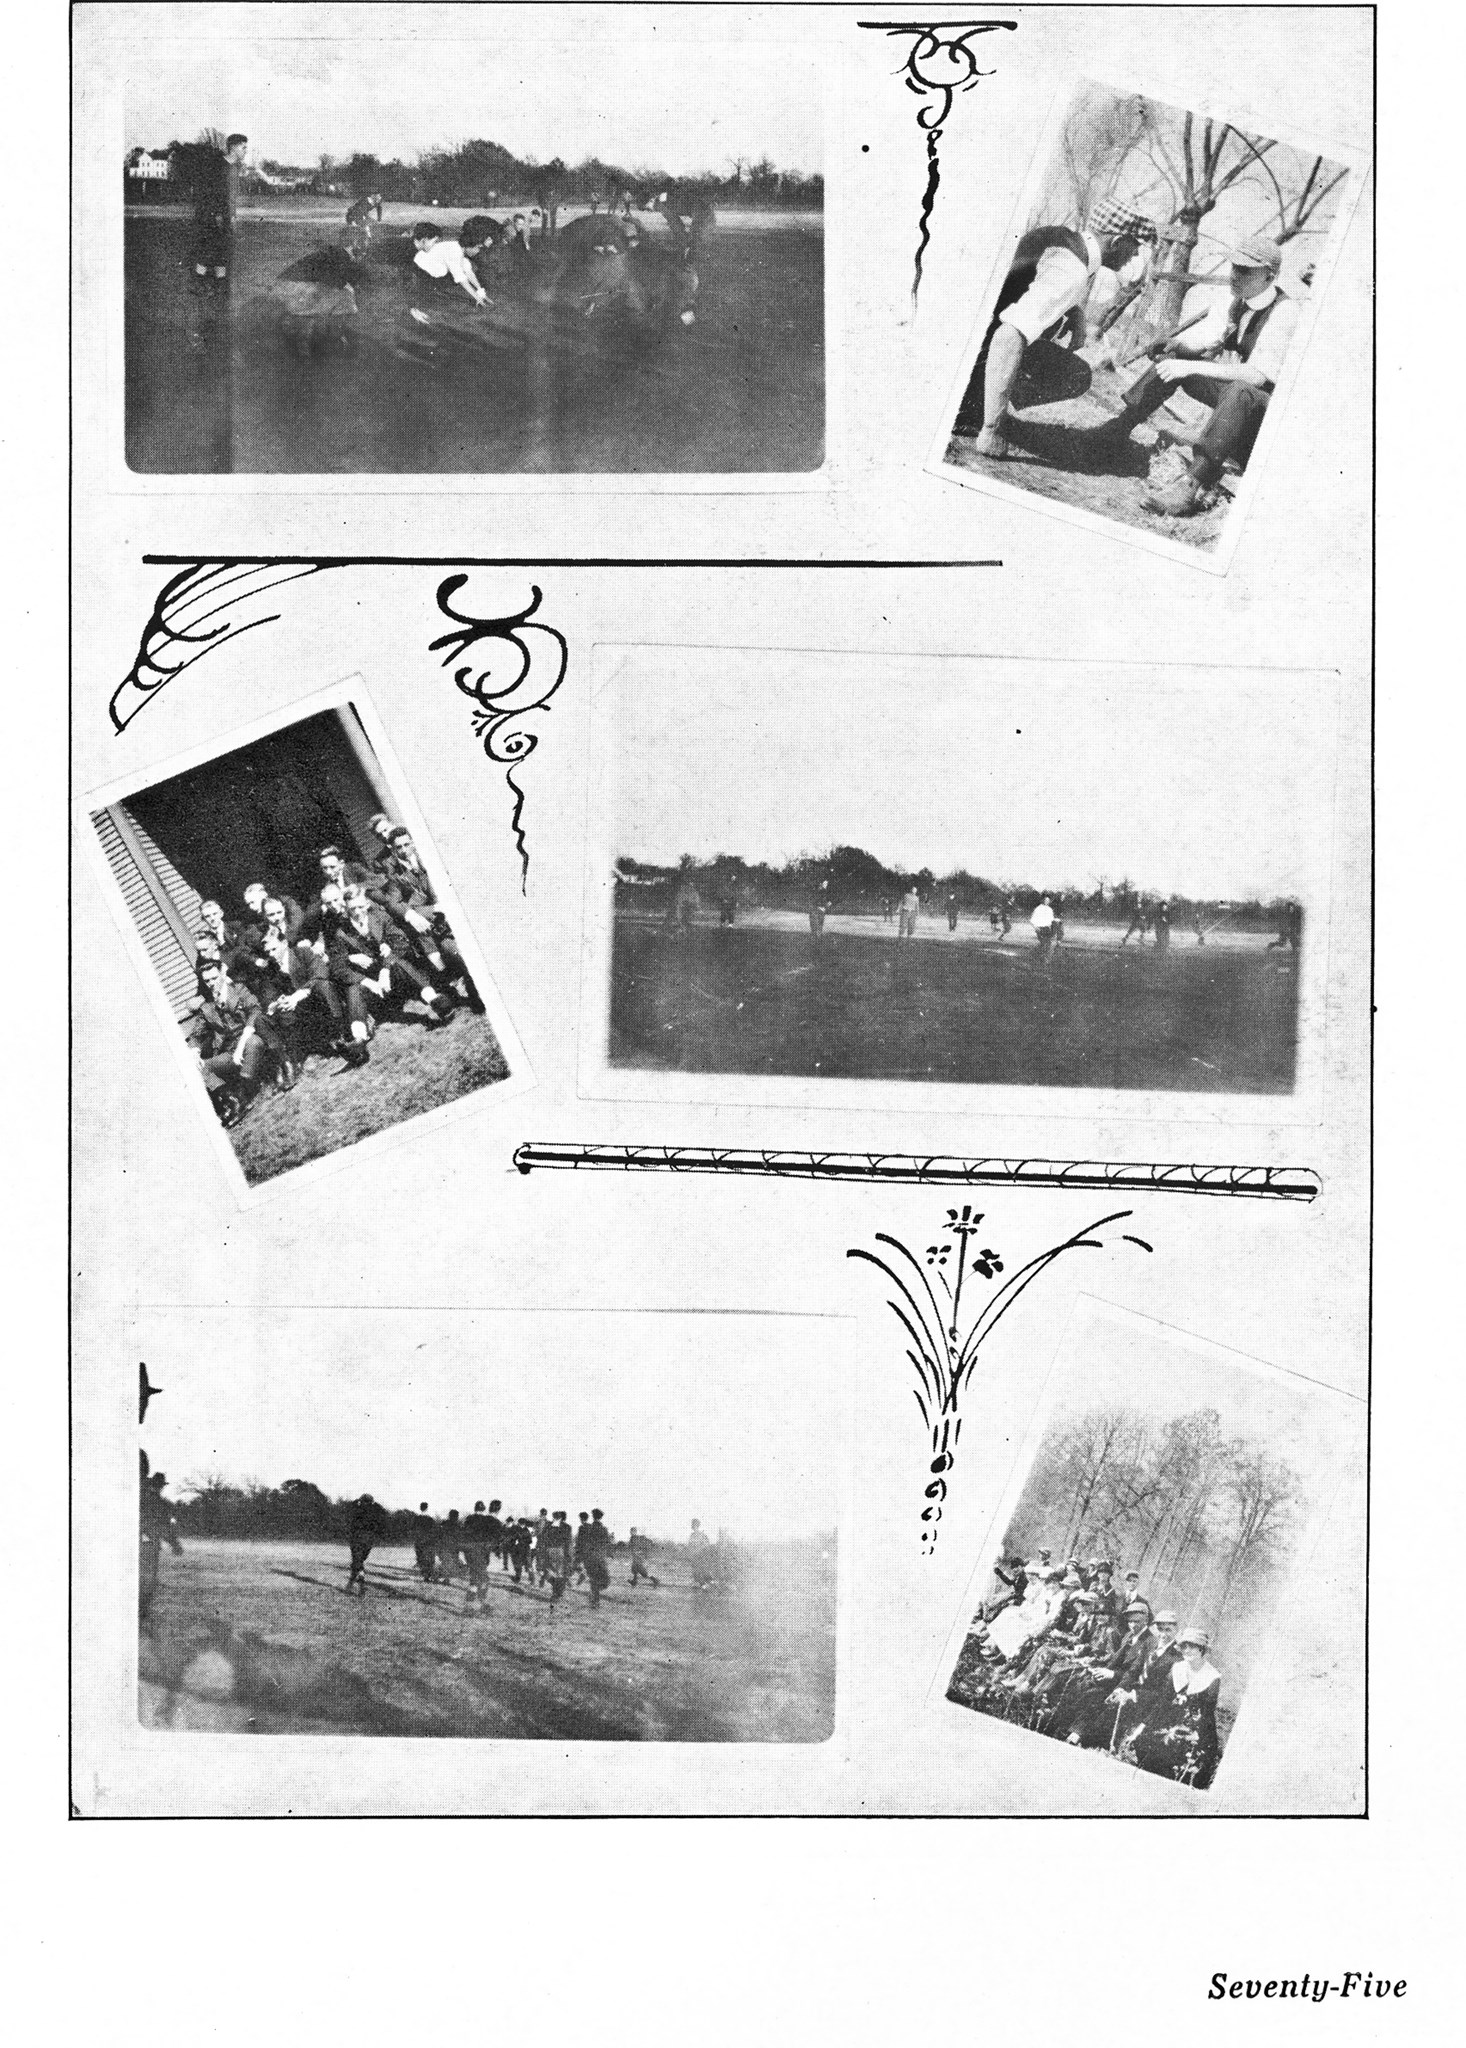 ../../../Images/Large/1916/Arclight-1916-pg0075.jpg